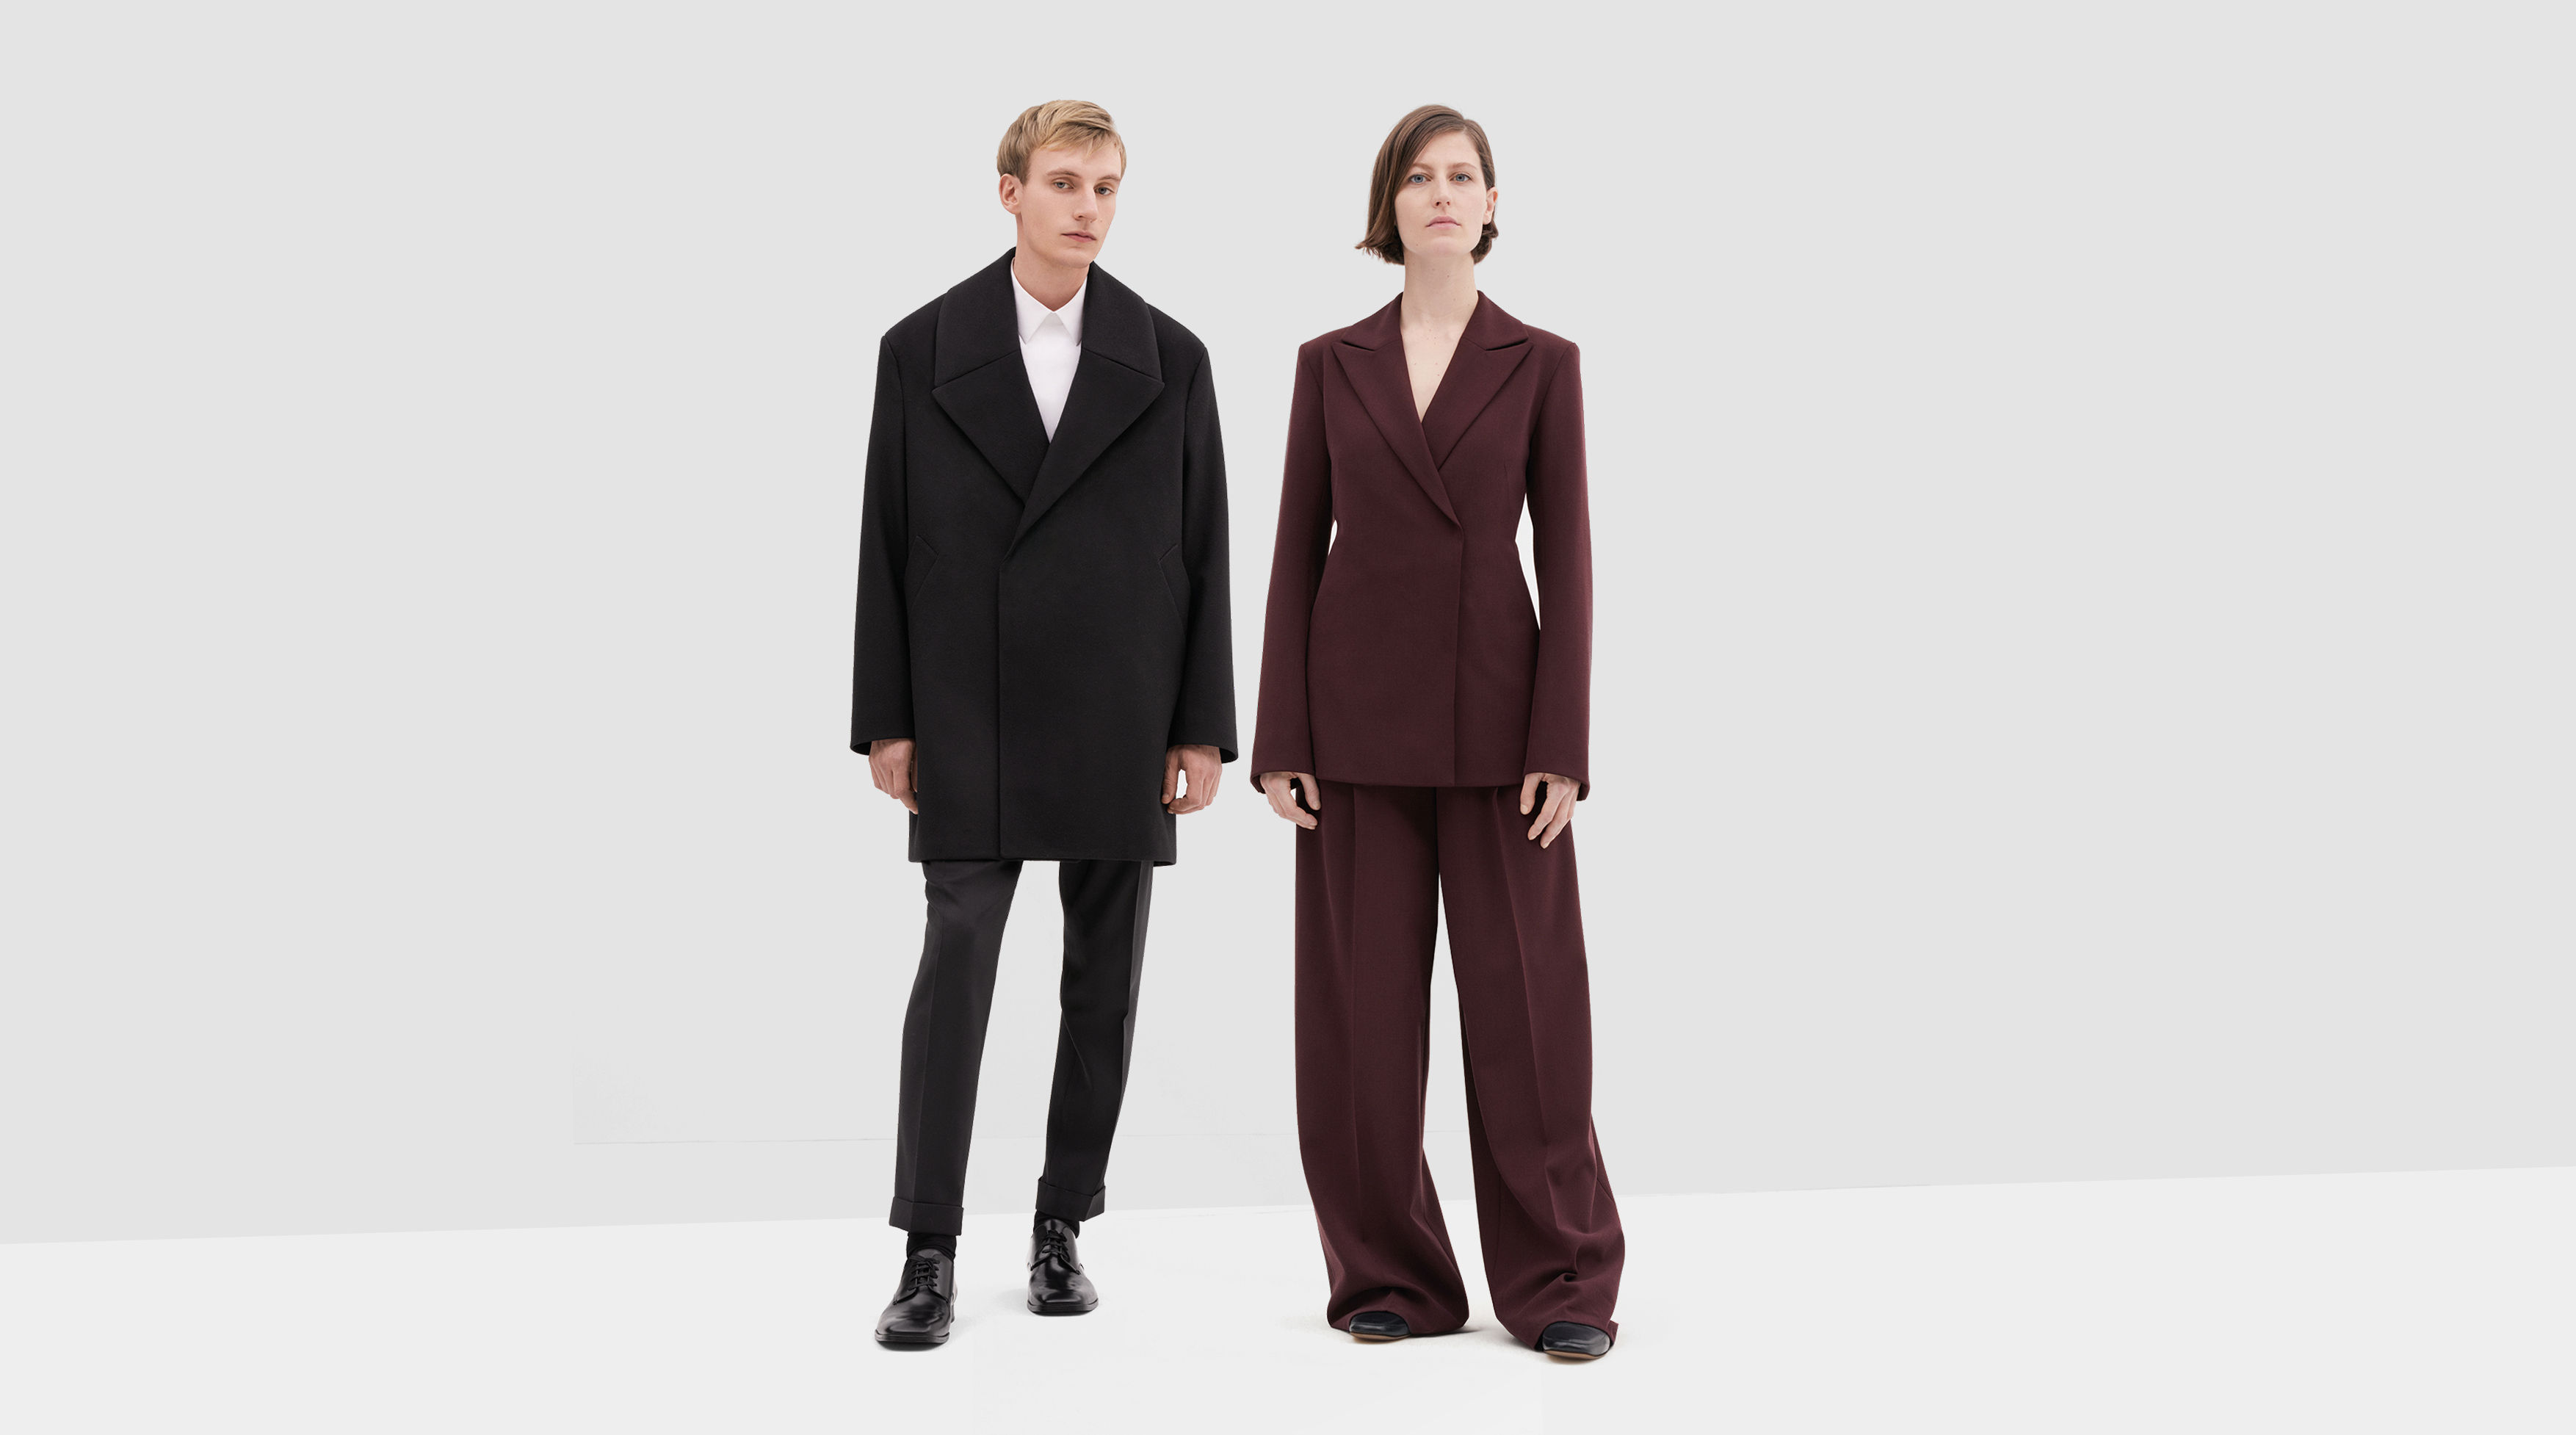 His and hers: COS Fall/Winter 2017 collection is classic workwear redefined